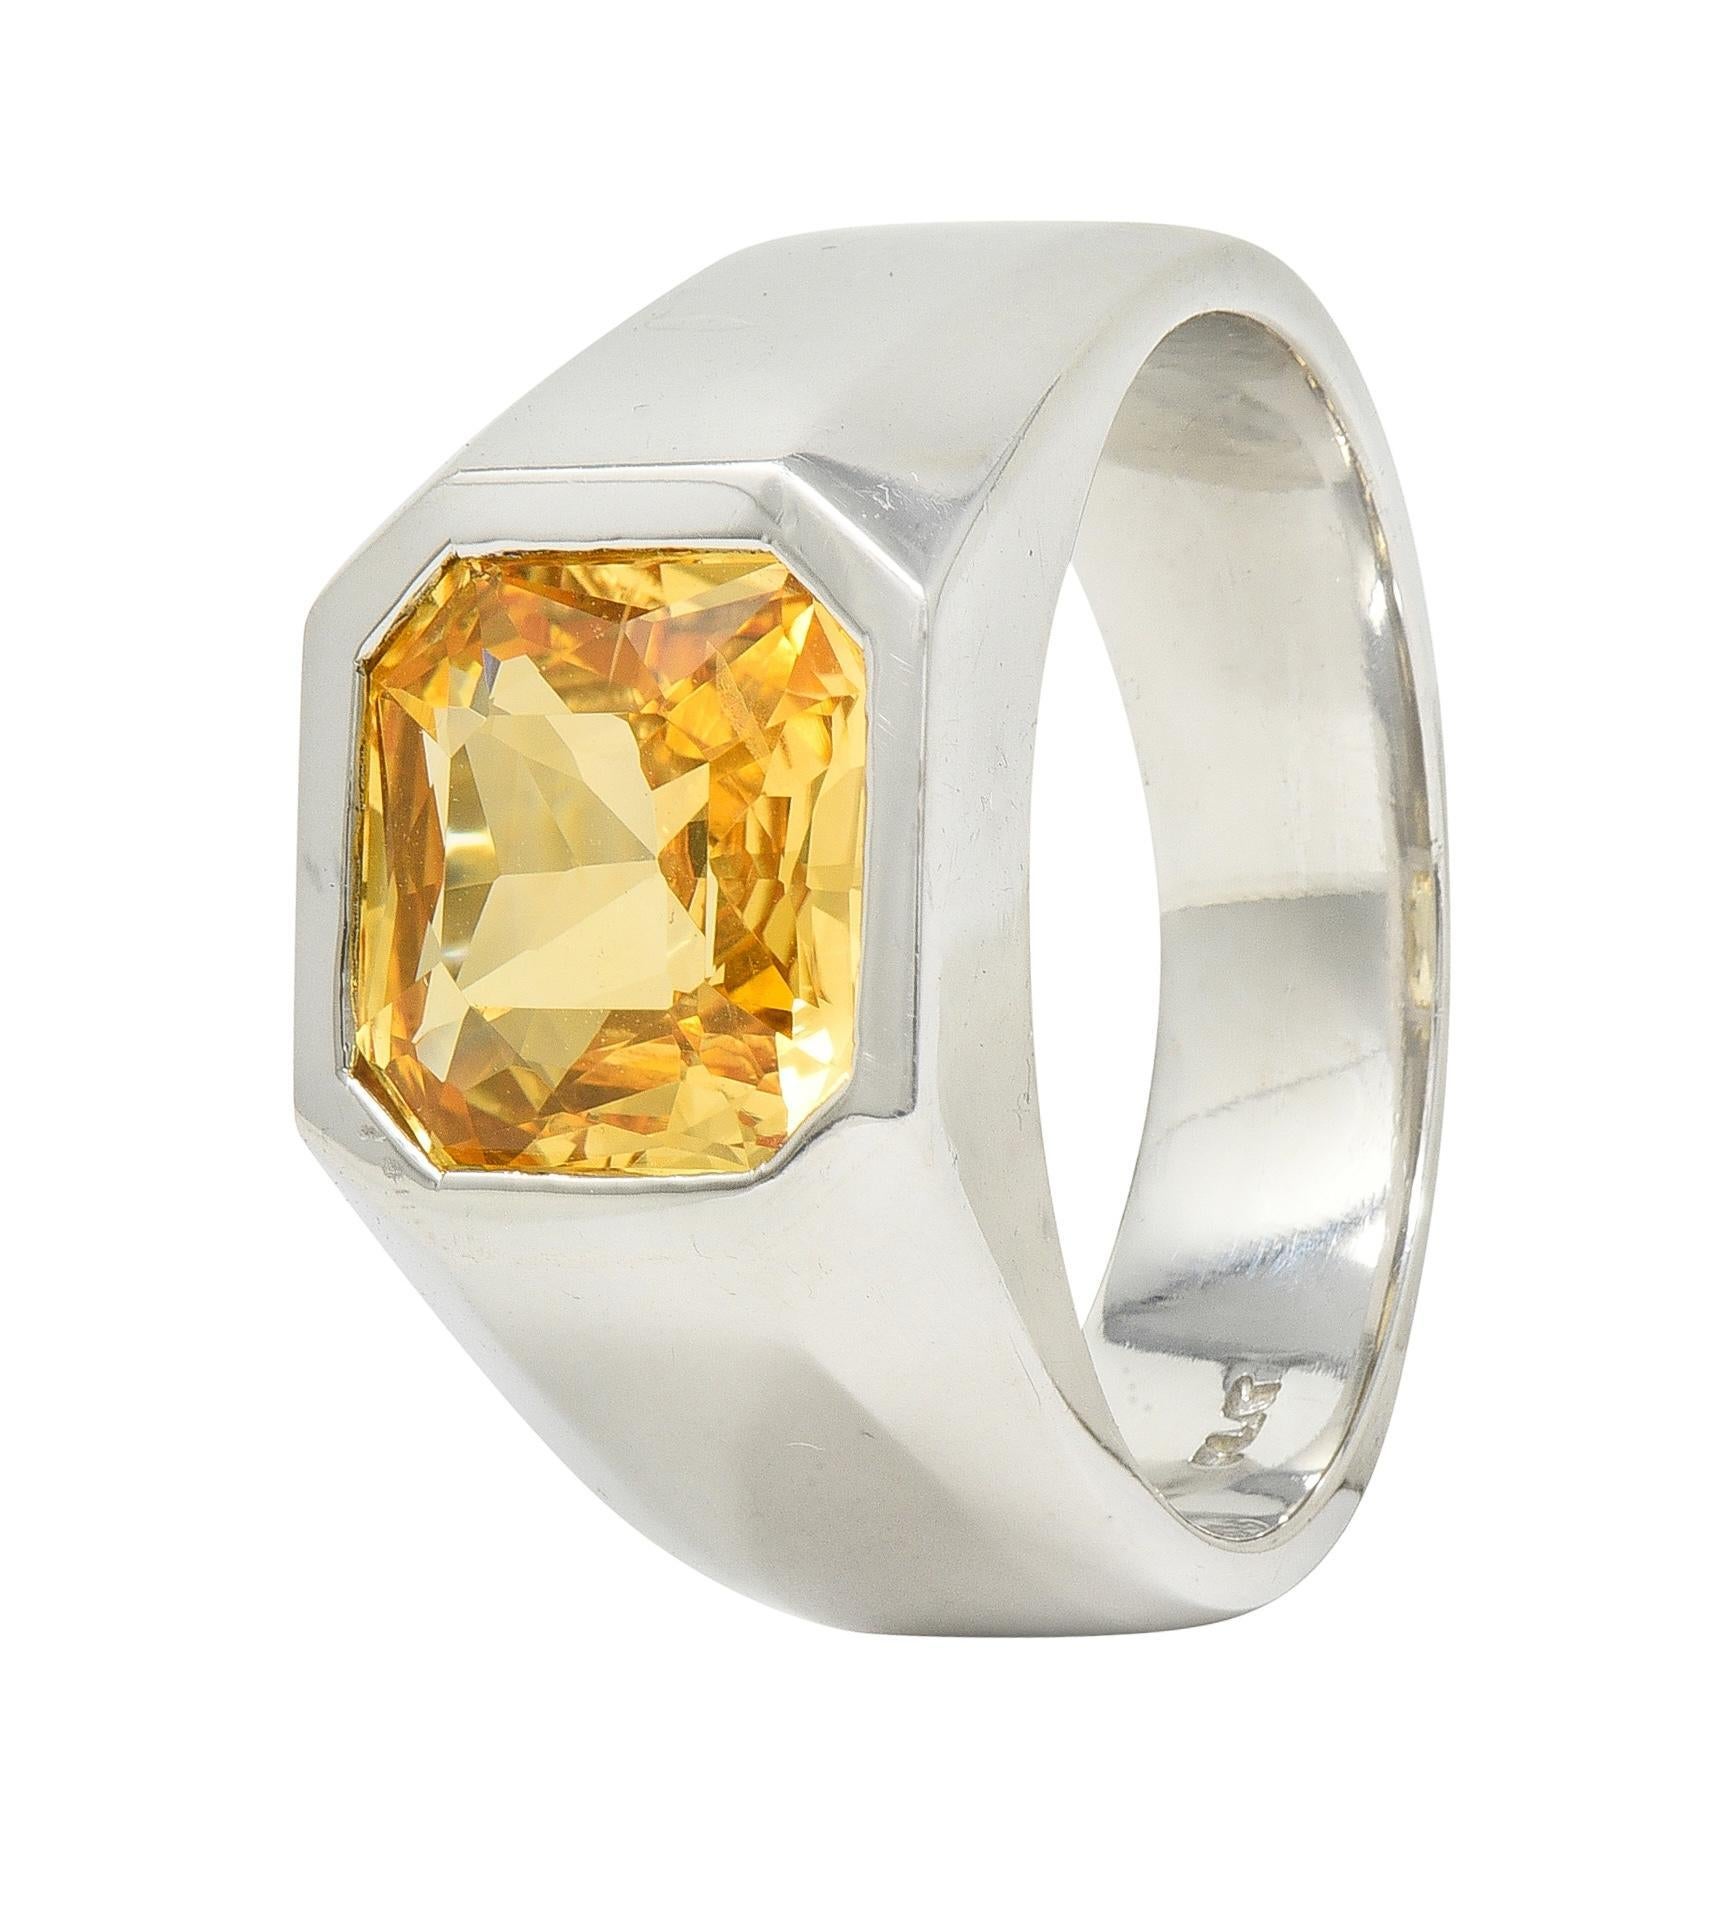 Centering a cushion cut sapphire weighing 4.02 carats total - transparent orangy-yellow in color
Natural Sri Lankan in origin with no indications of heat treatment
Flush set in octagonal-shaped signet face 
With high polish faceted surround 
Stamped